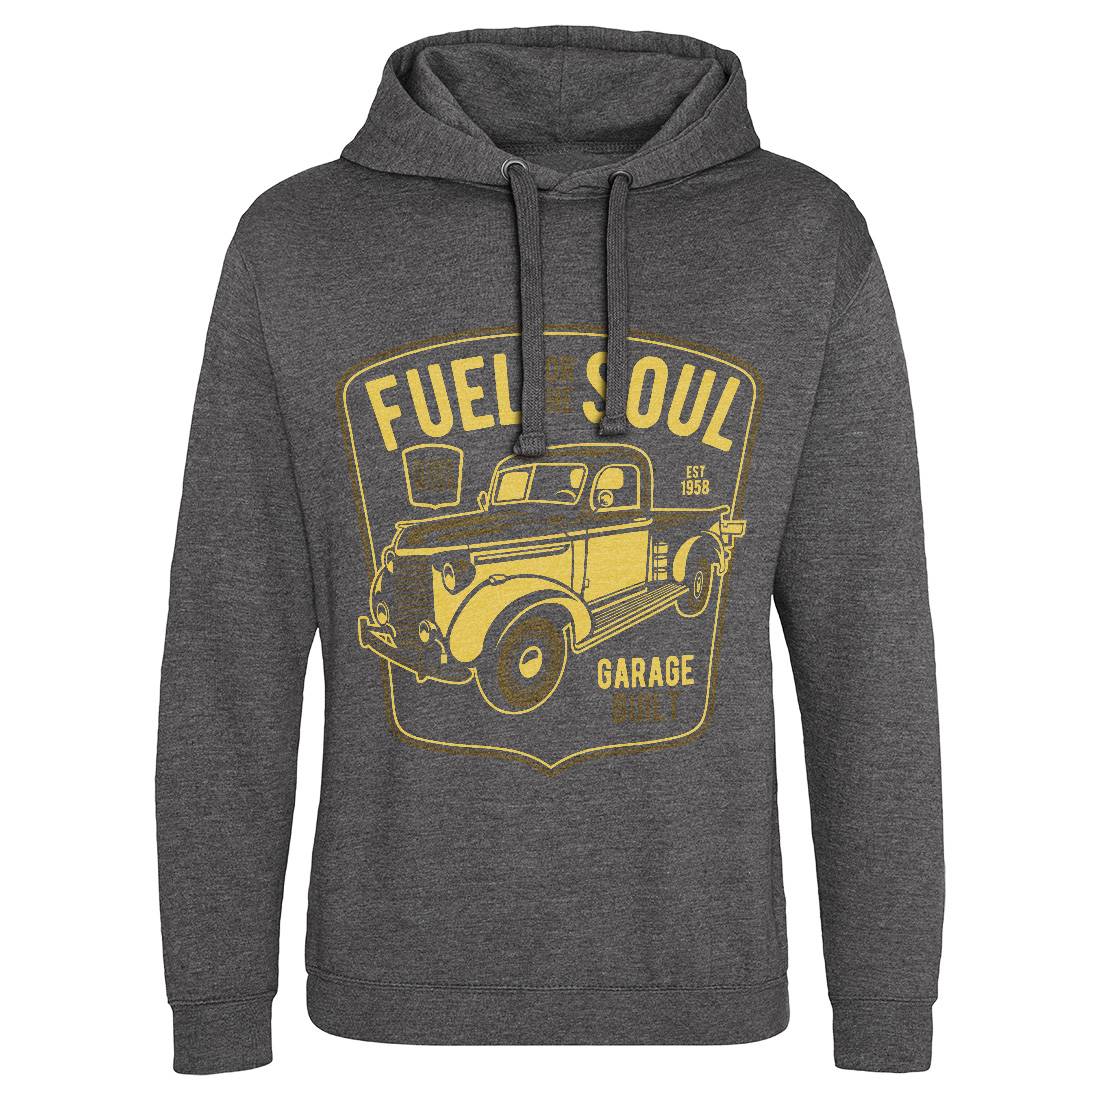 Fuel For The Soul Mens Hoodie Without Pocket Cars B213